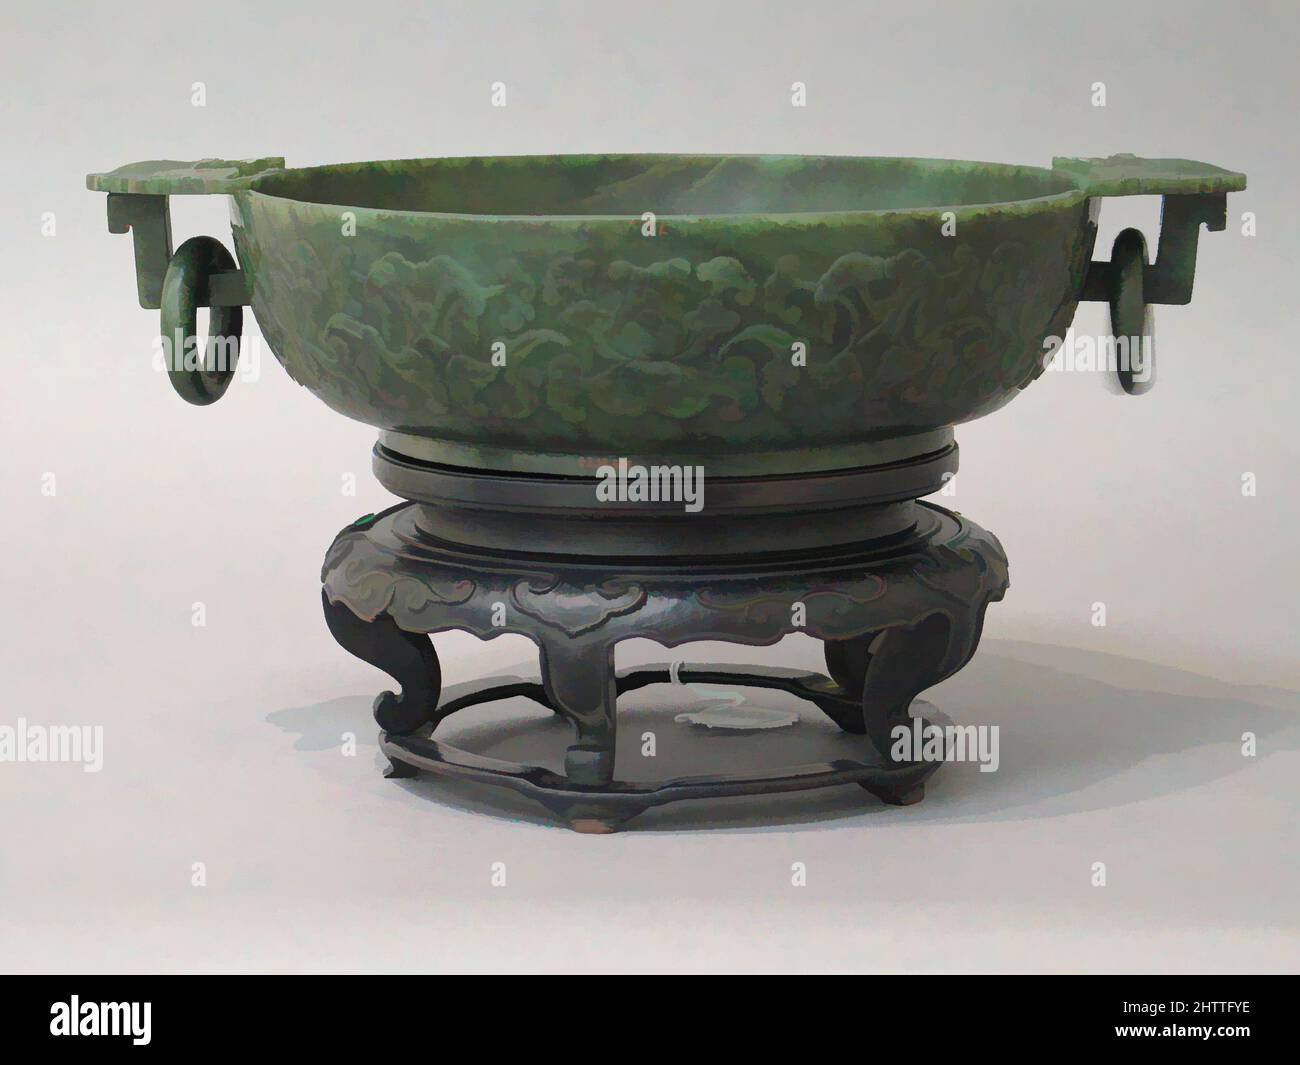 Art inspired by Bowl with Square Handles, Qing dynasty (1644–1911), Qianlong period (1736–95), China, Nephrite, spinach-green with black specks and mottlings of brown clouds, H. 3 in. (7.6 cm); W. 13 1/8 in. (33.4 cm), Jade, Classic works modernized by Artotop with a splash of modernity. Shapes, color and value, eye-catching visual impact on art. Emotions through freedom of artworks in a contemporary way. A timeless message pursuing a wildly creative new direction. Artists turning to the digital medium and creating the Artotop NFT Stock Photo